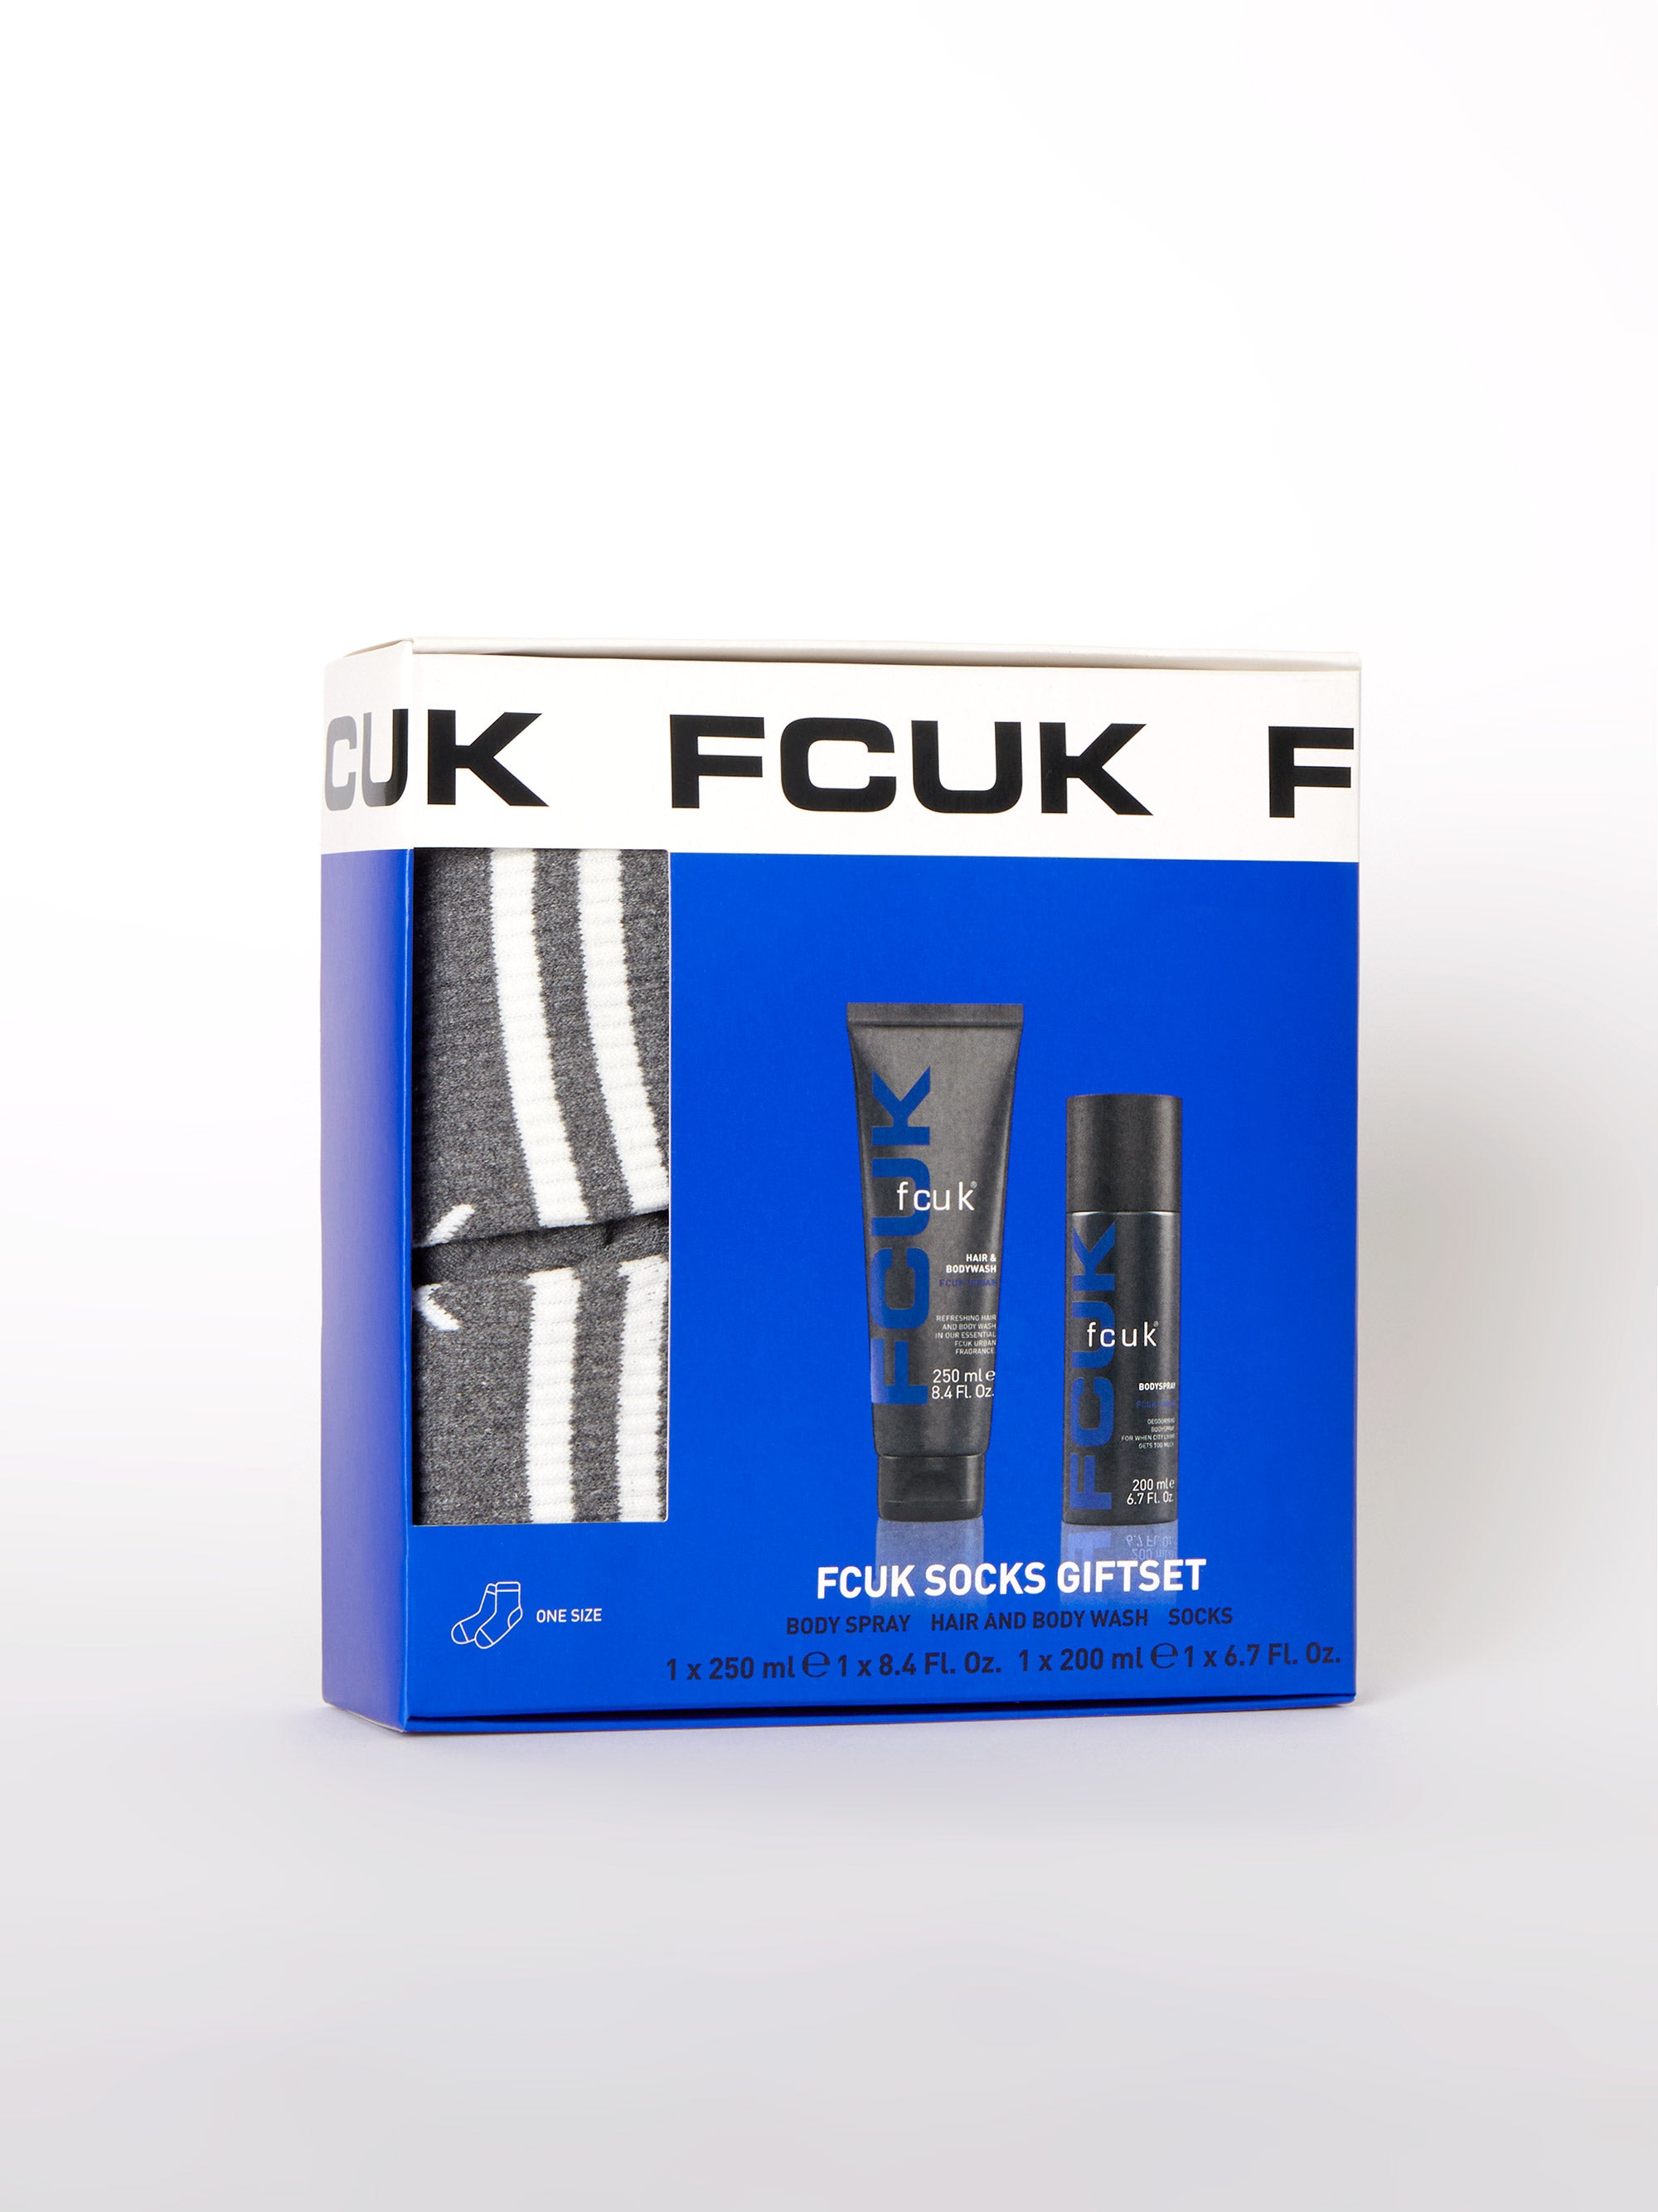 French Connection - Fcuk Socks Giftset | French Connection |  Perfume & Cologne | One size - Black - Size: OS